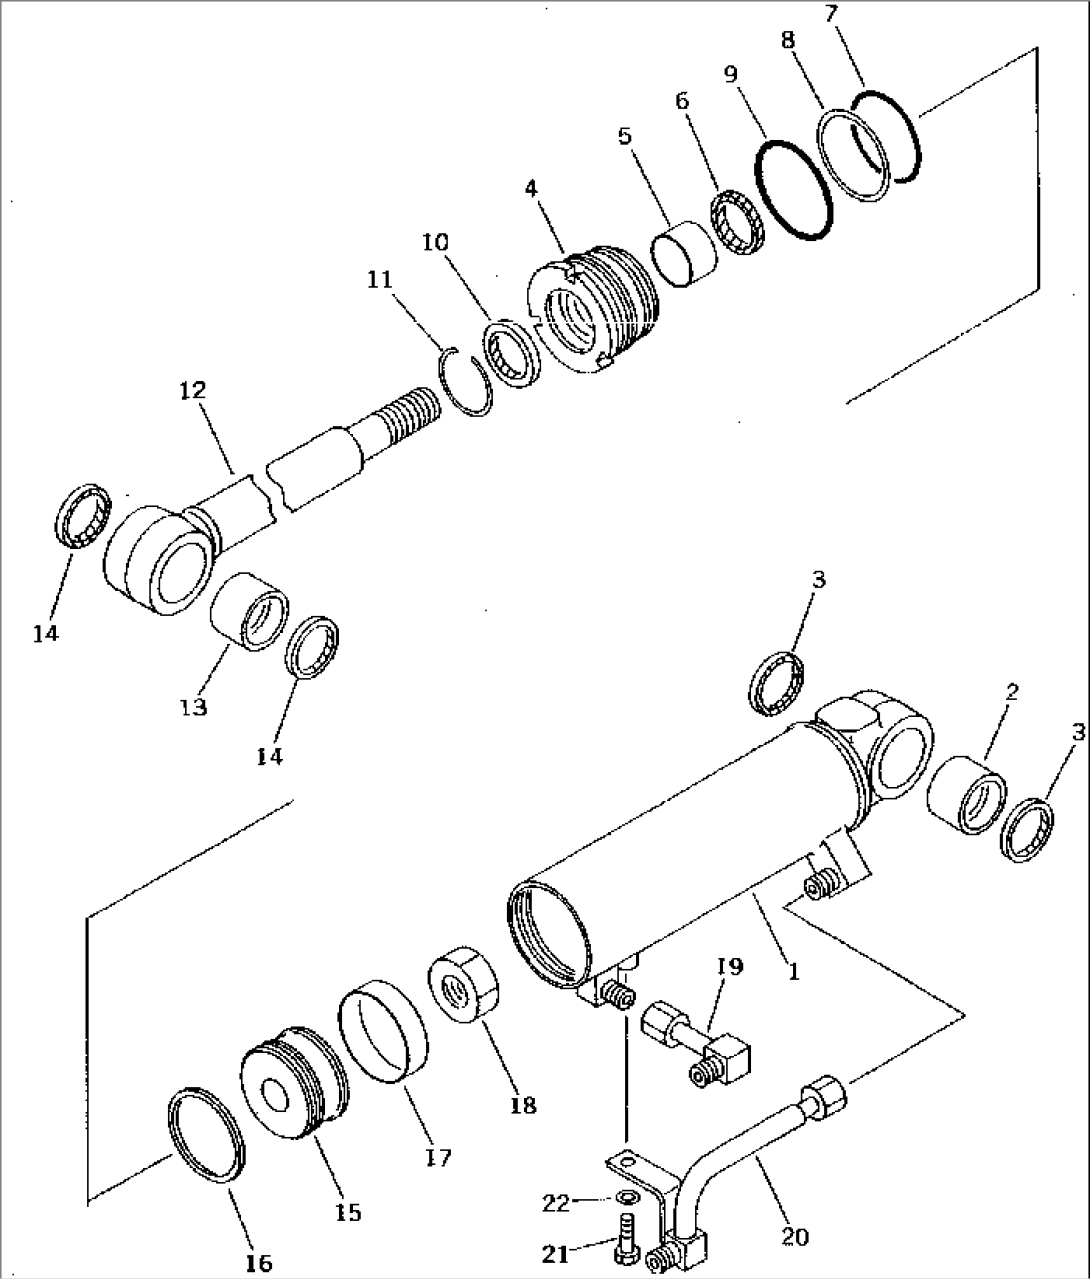 3-POINT HITCH CYLINDER